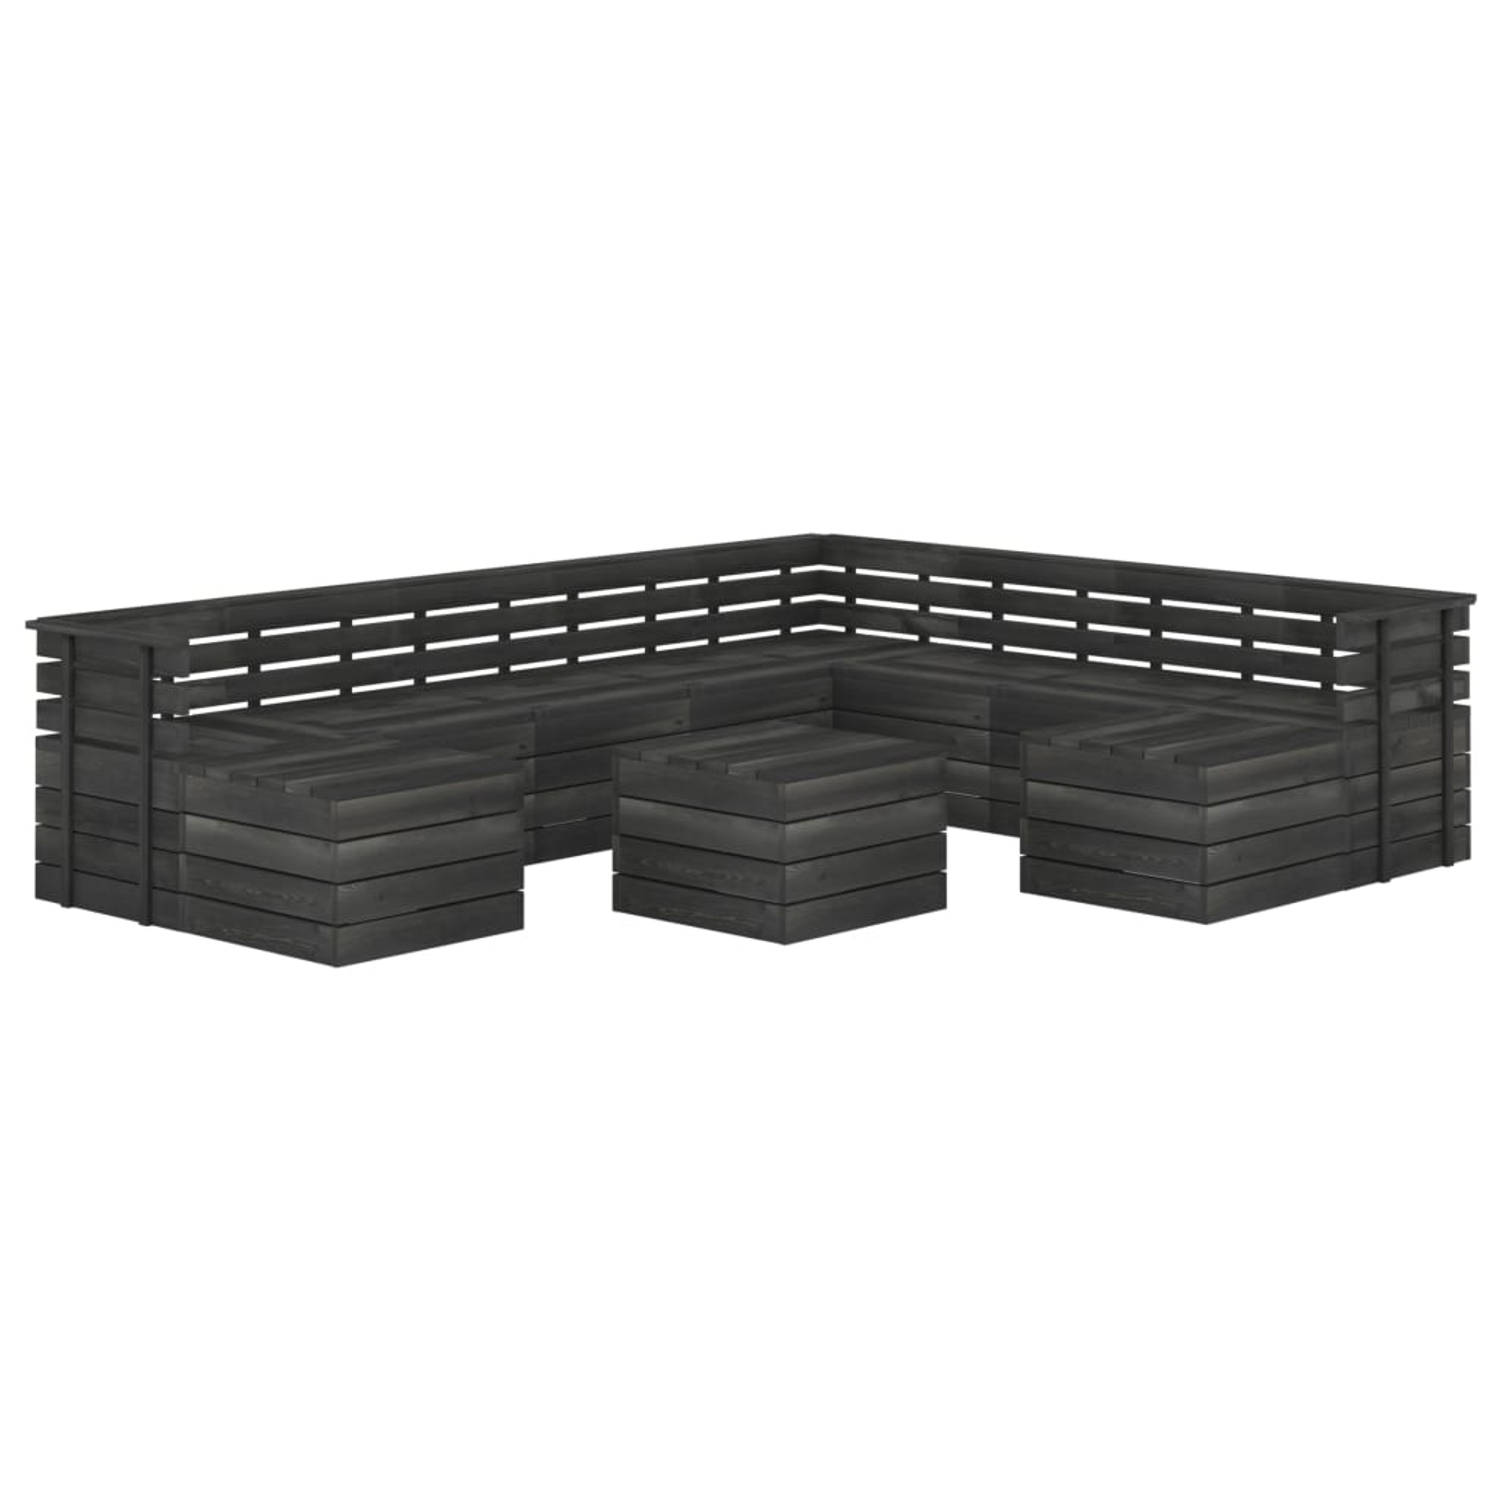 The Living Store Pallet Tuinset - Grenenhout - 60 x 65 x 71.5 cm - Donkergrijs